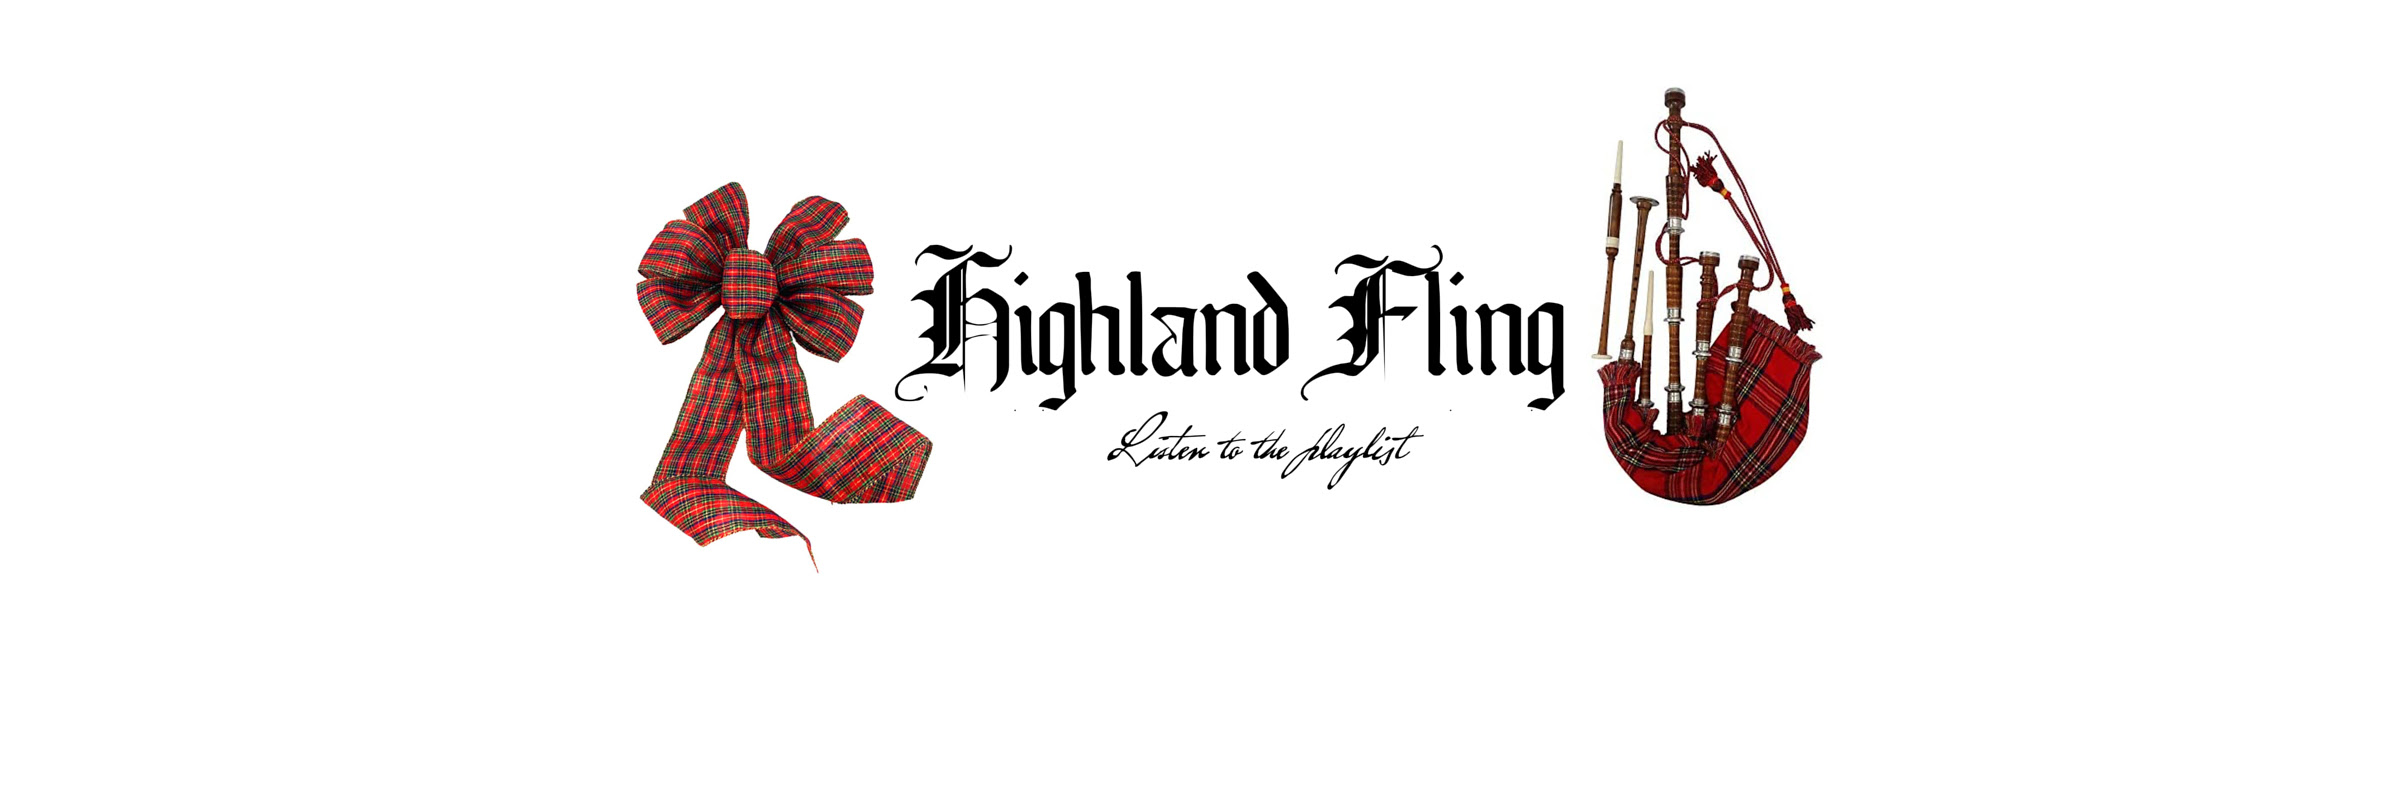 Listen to our playlist on Spotify: Highland Fling